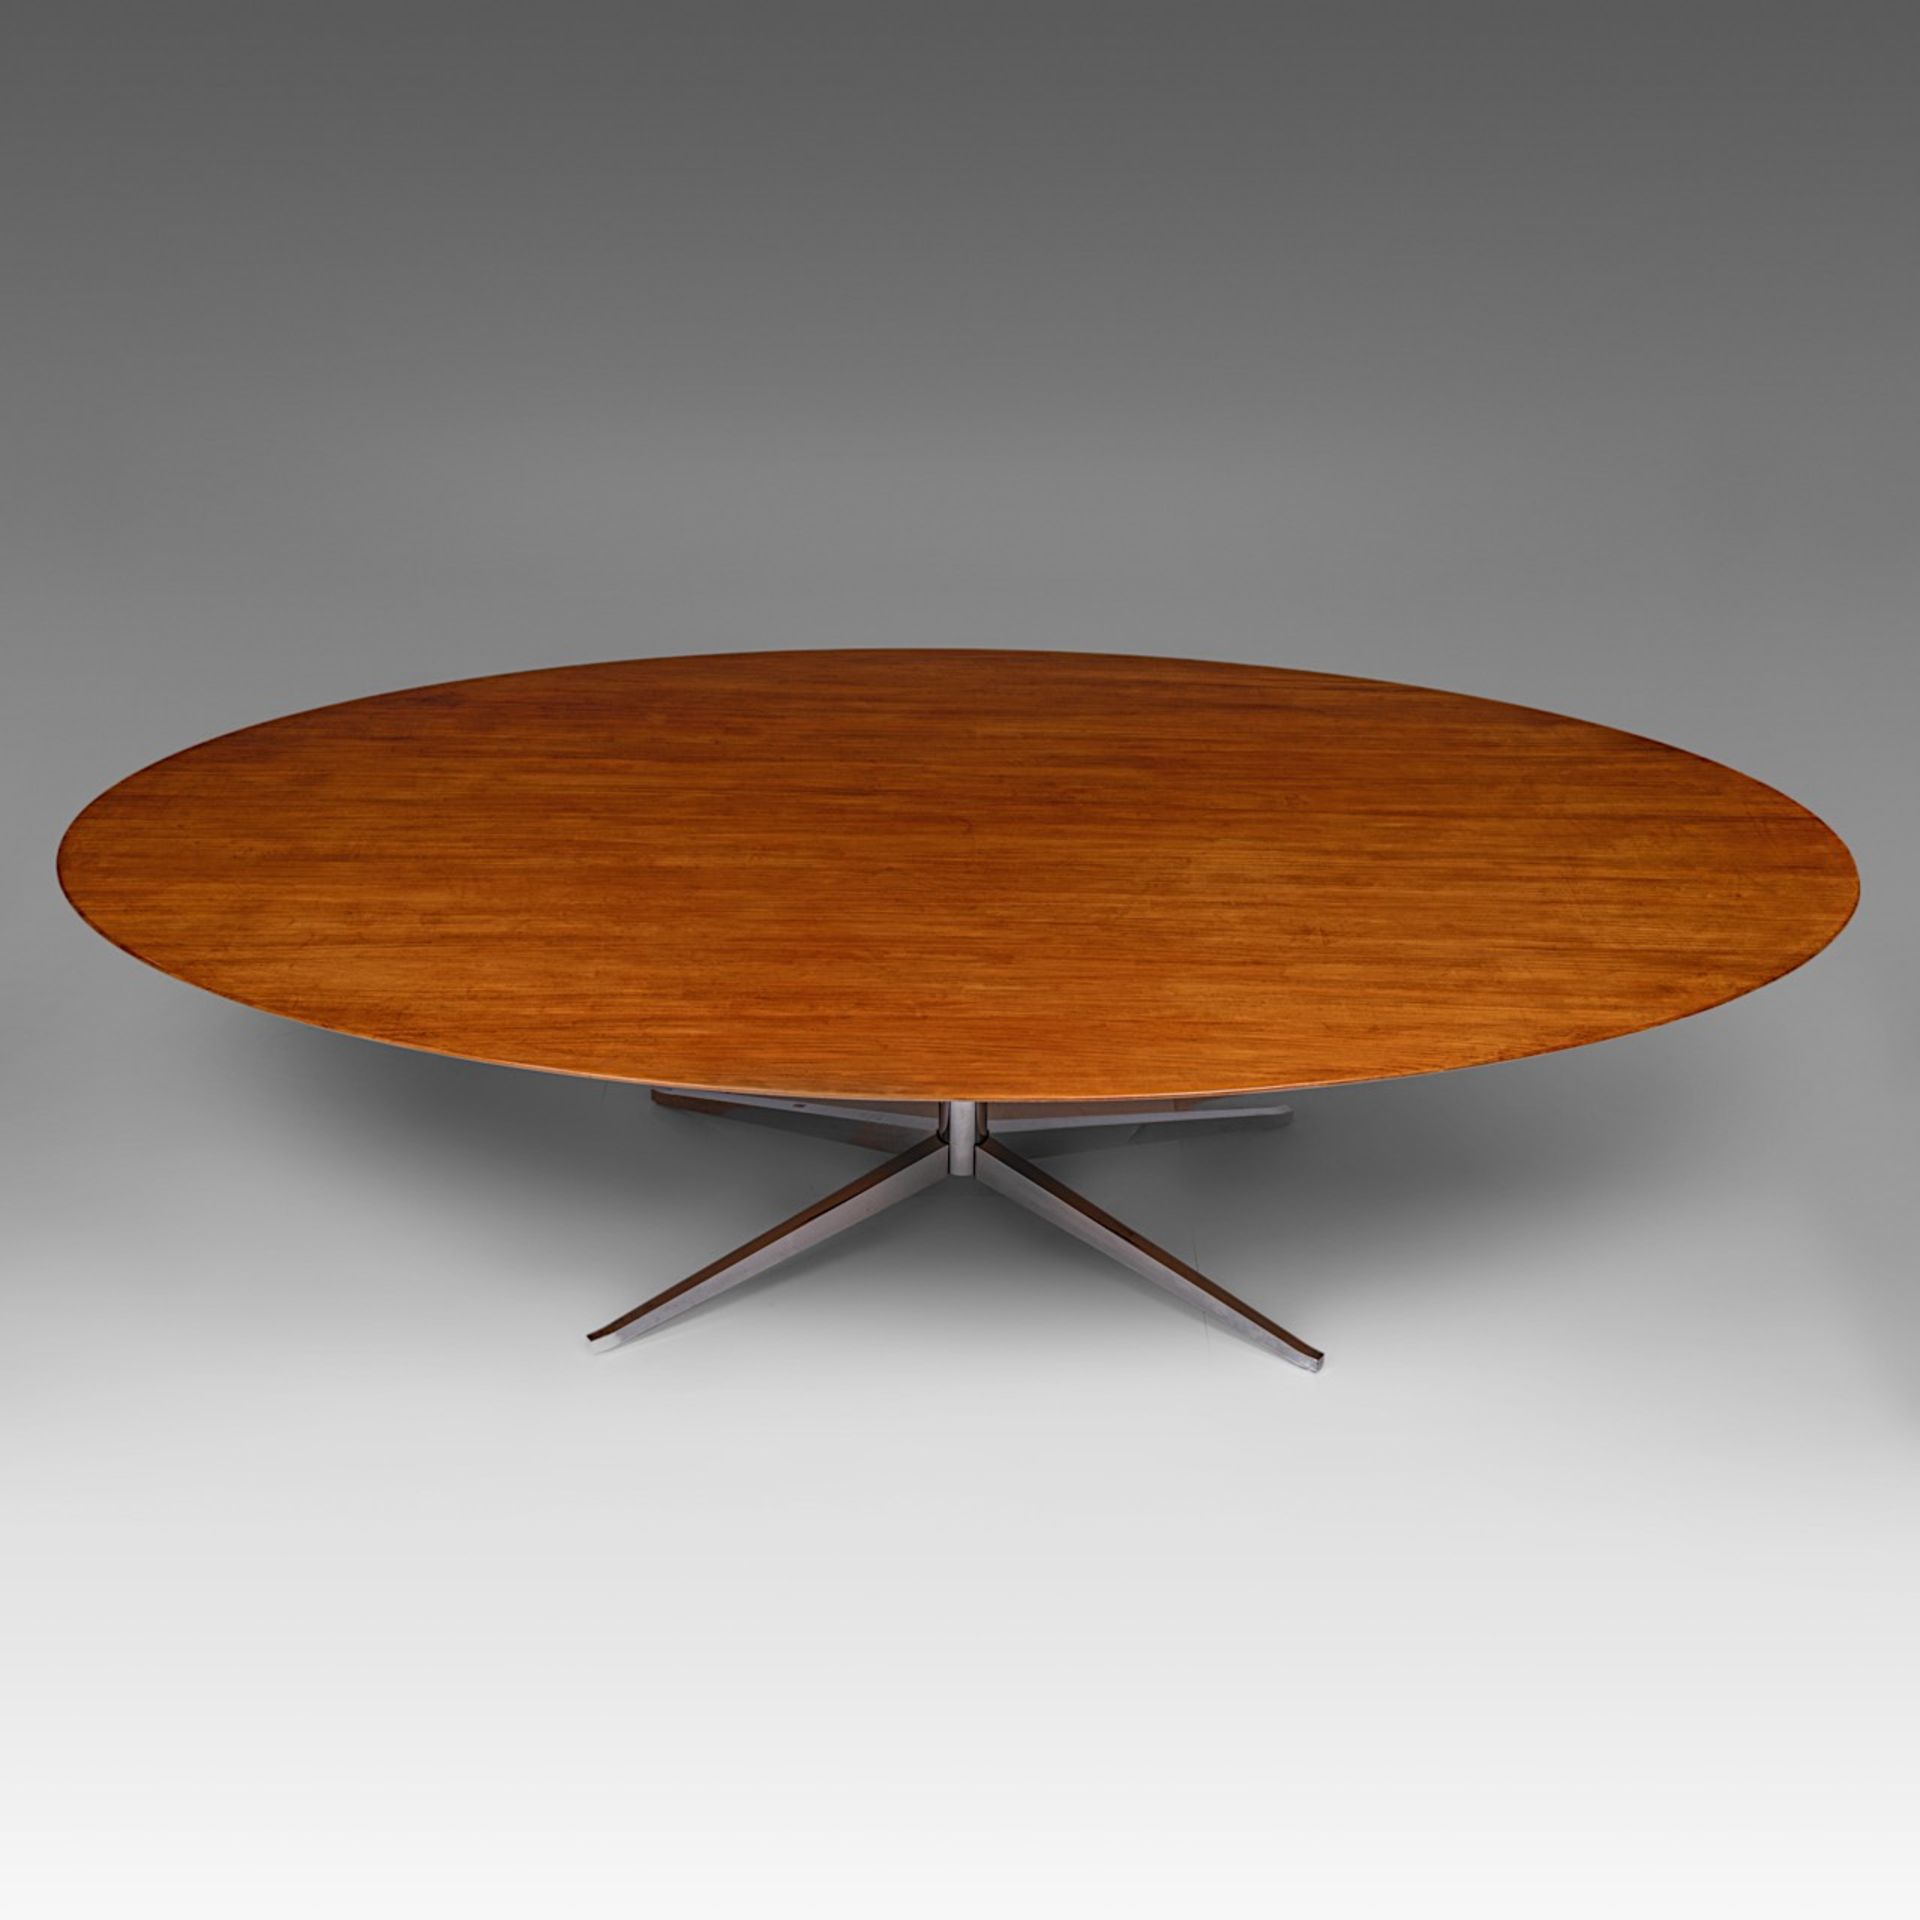 A design dining table by Florence Knoll, walnut table top on a chromed metal frame, H 72 - W 200 - D - Bild 6 aus 6